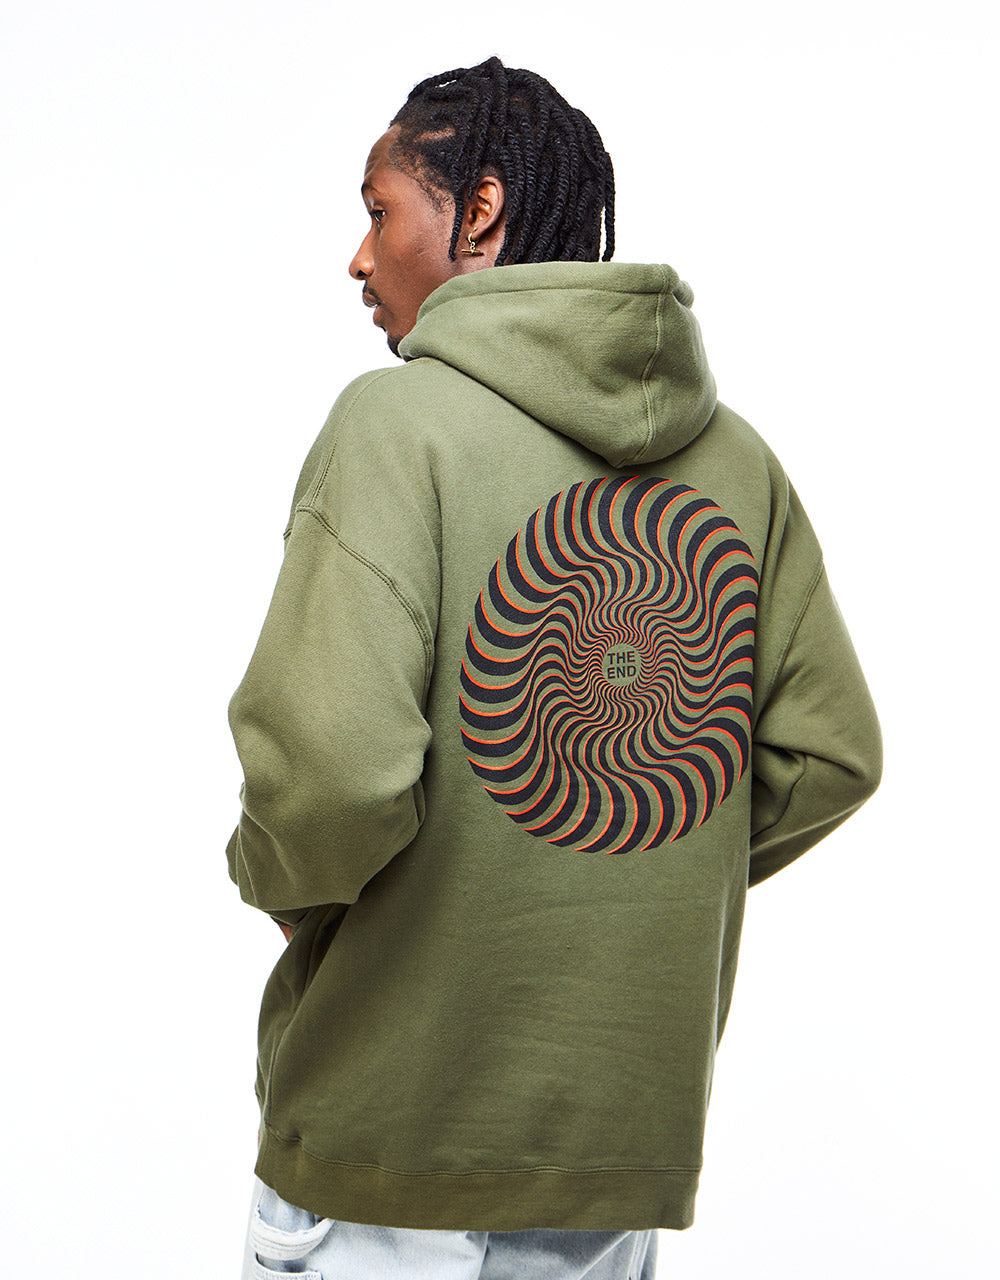 Spitfire Classic Swirl Overlay Pullover Hoodie - Army/Black-Red